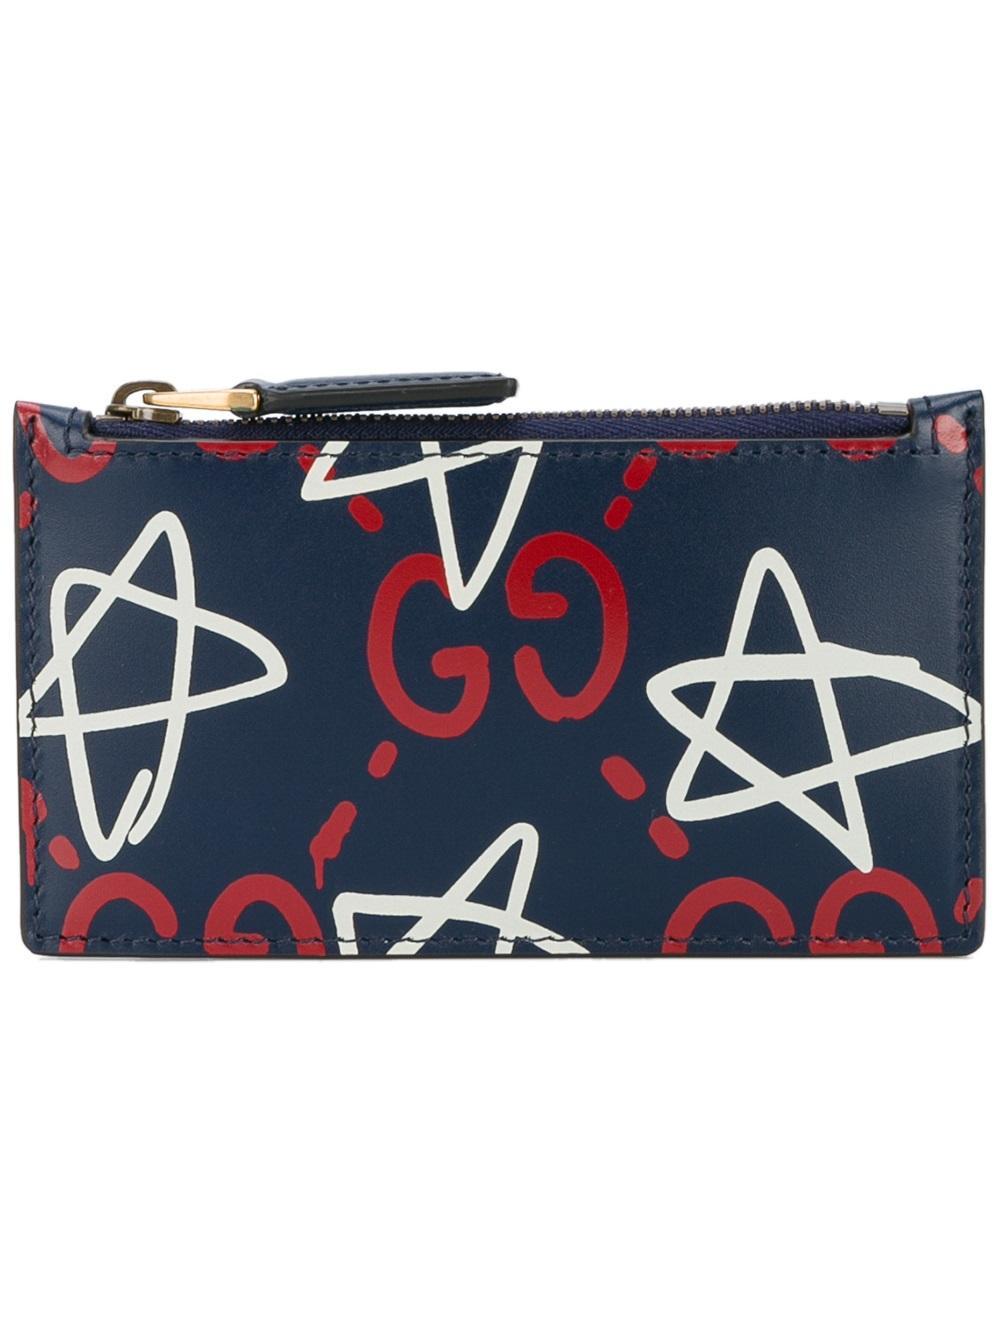 Lyst - Gucci Ghost Logo Card Holder in Blue for Men